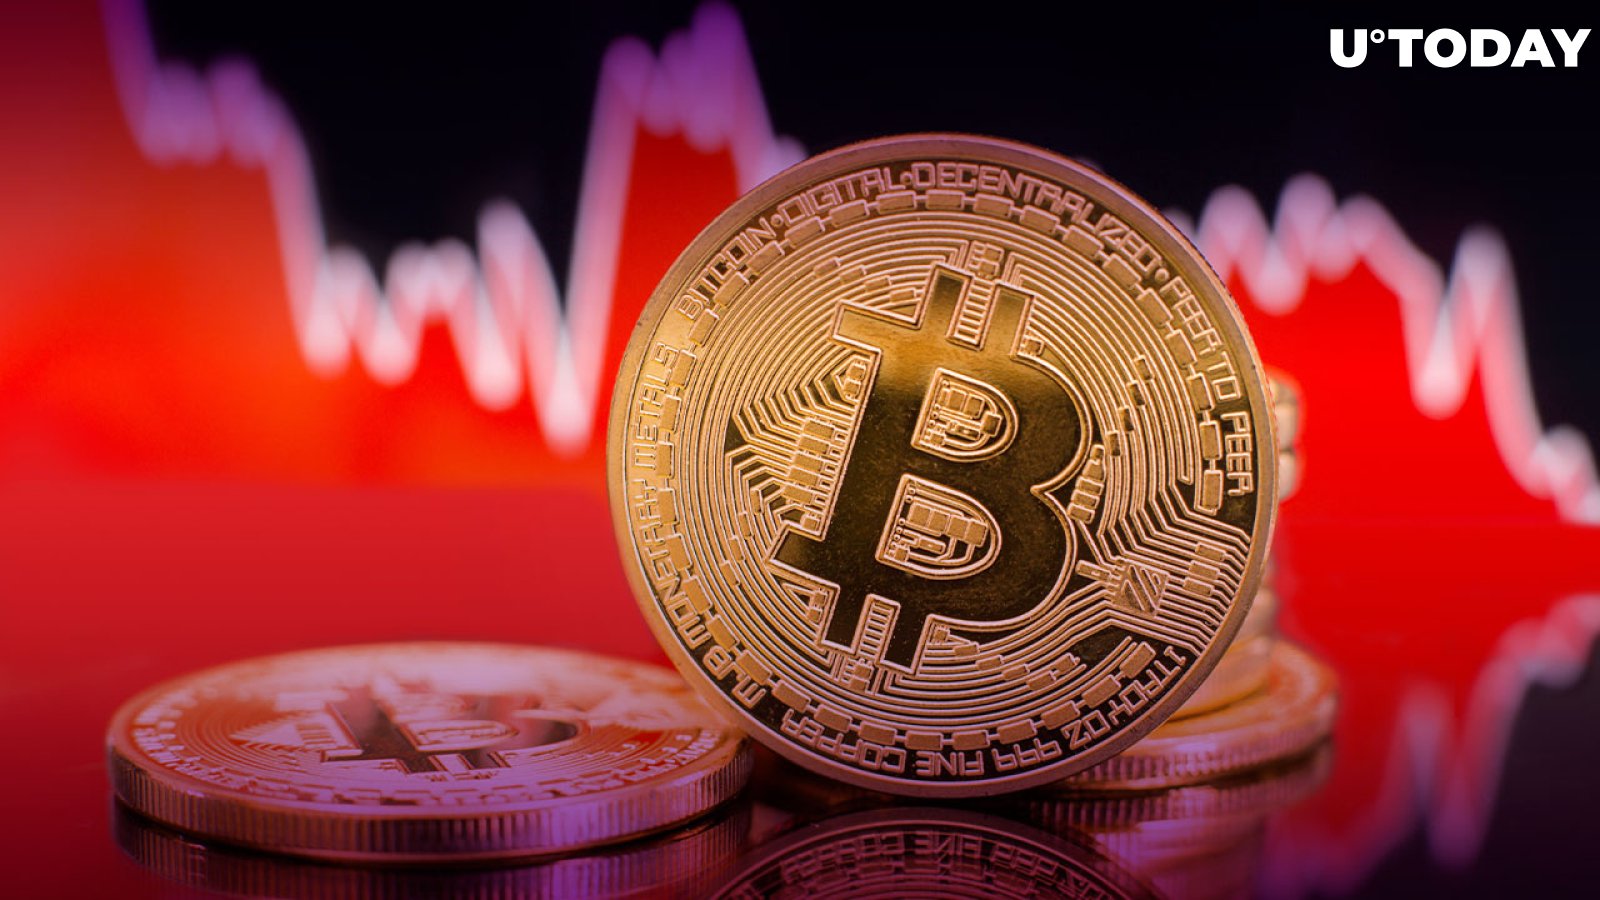 Here's How Bitcoin's Downtrend May End